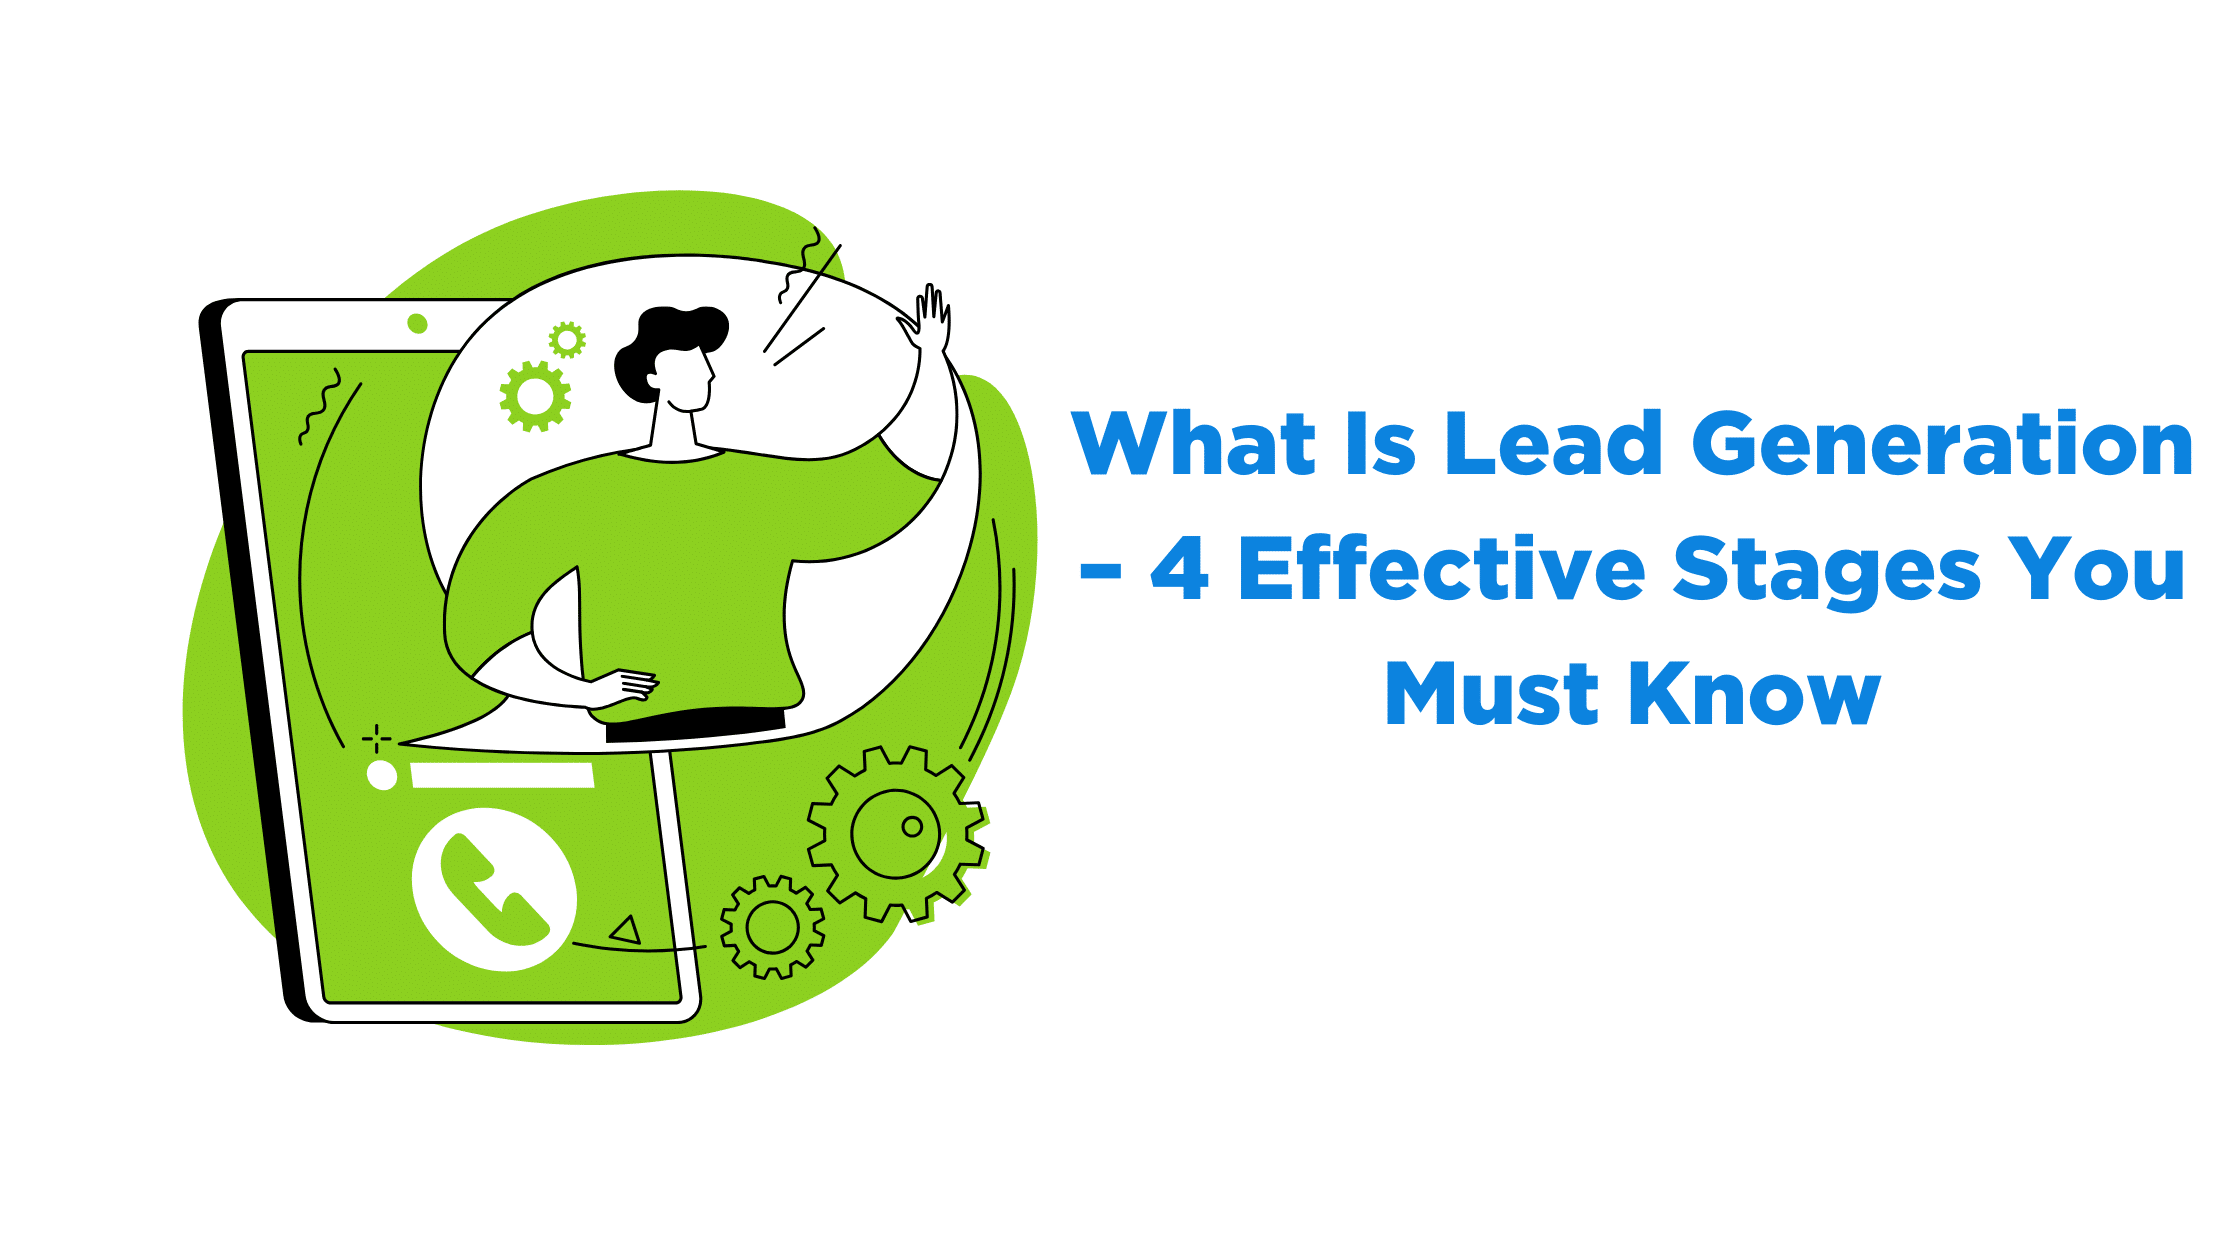 What Is Lead Generation – 4 Effective Stages You Must Know